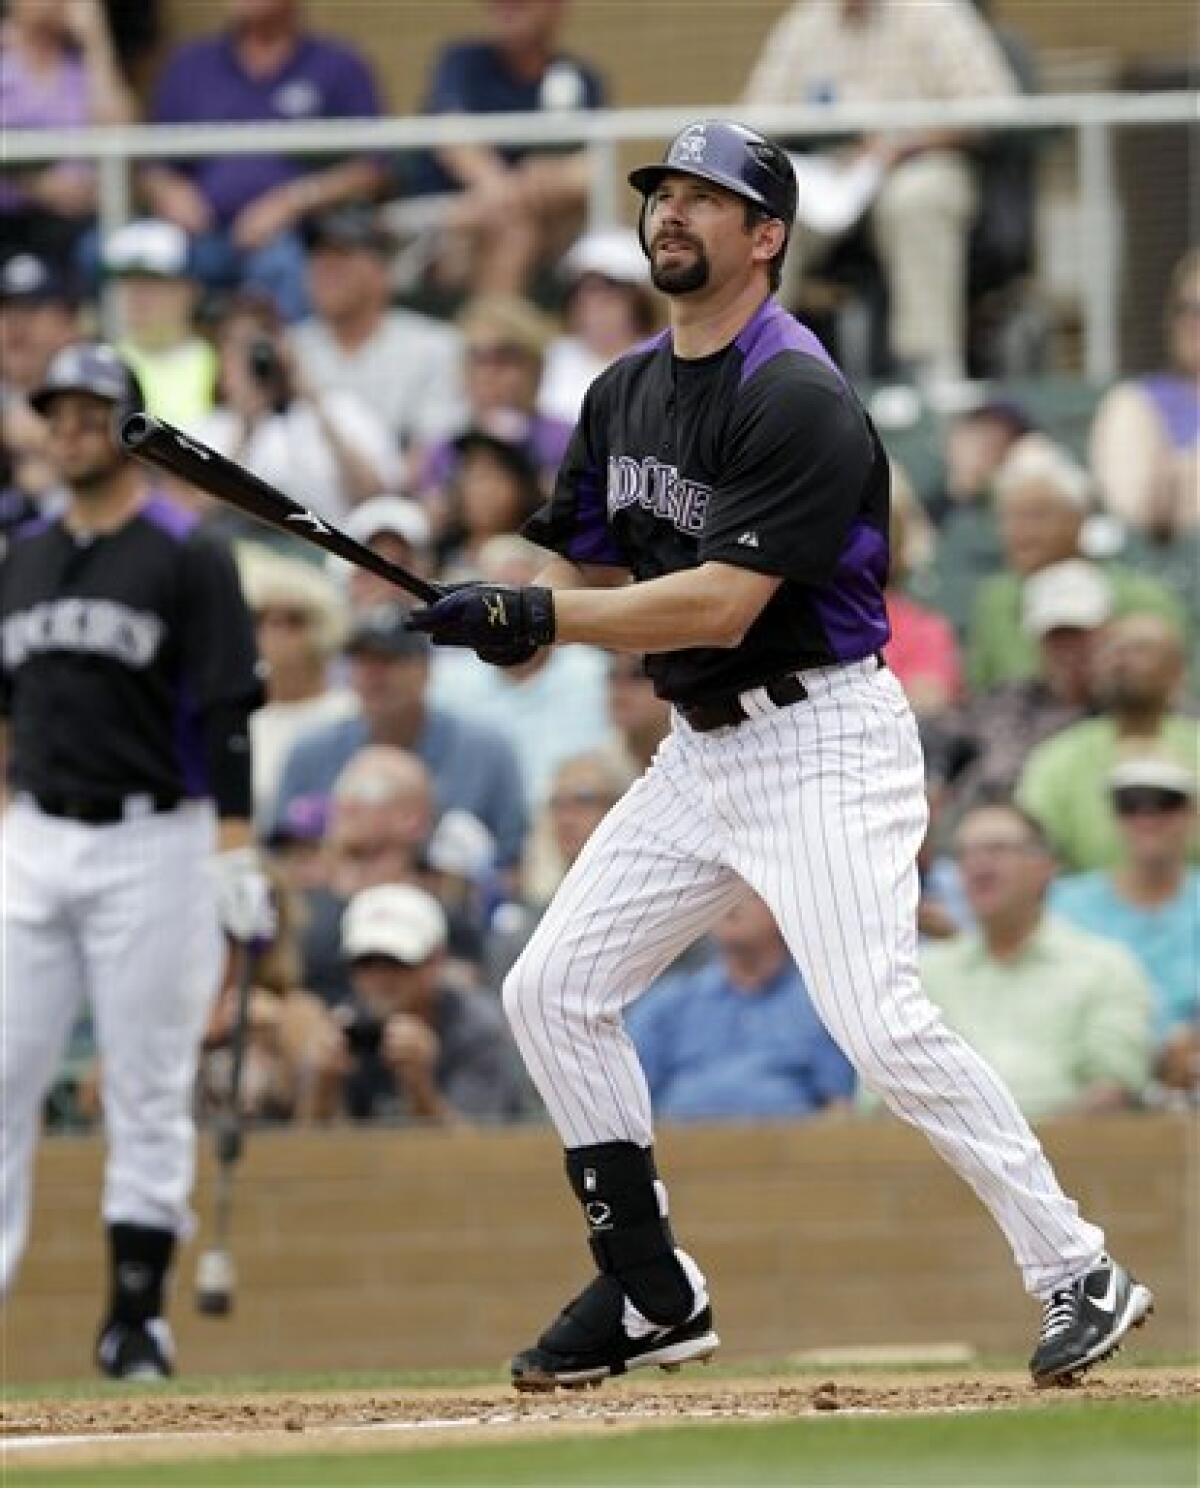 Rockies vs. Reds Game 3 preview: This day belongs to Todd Helton